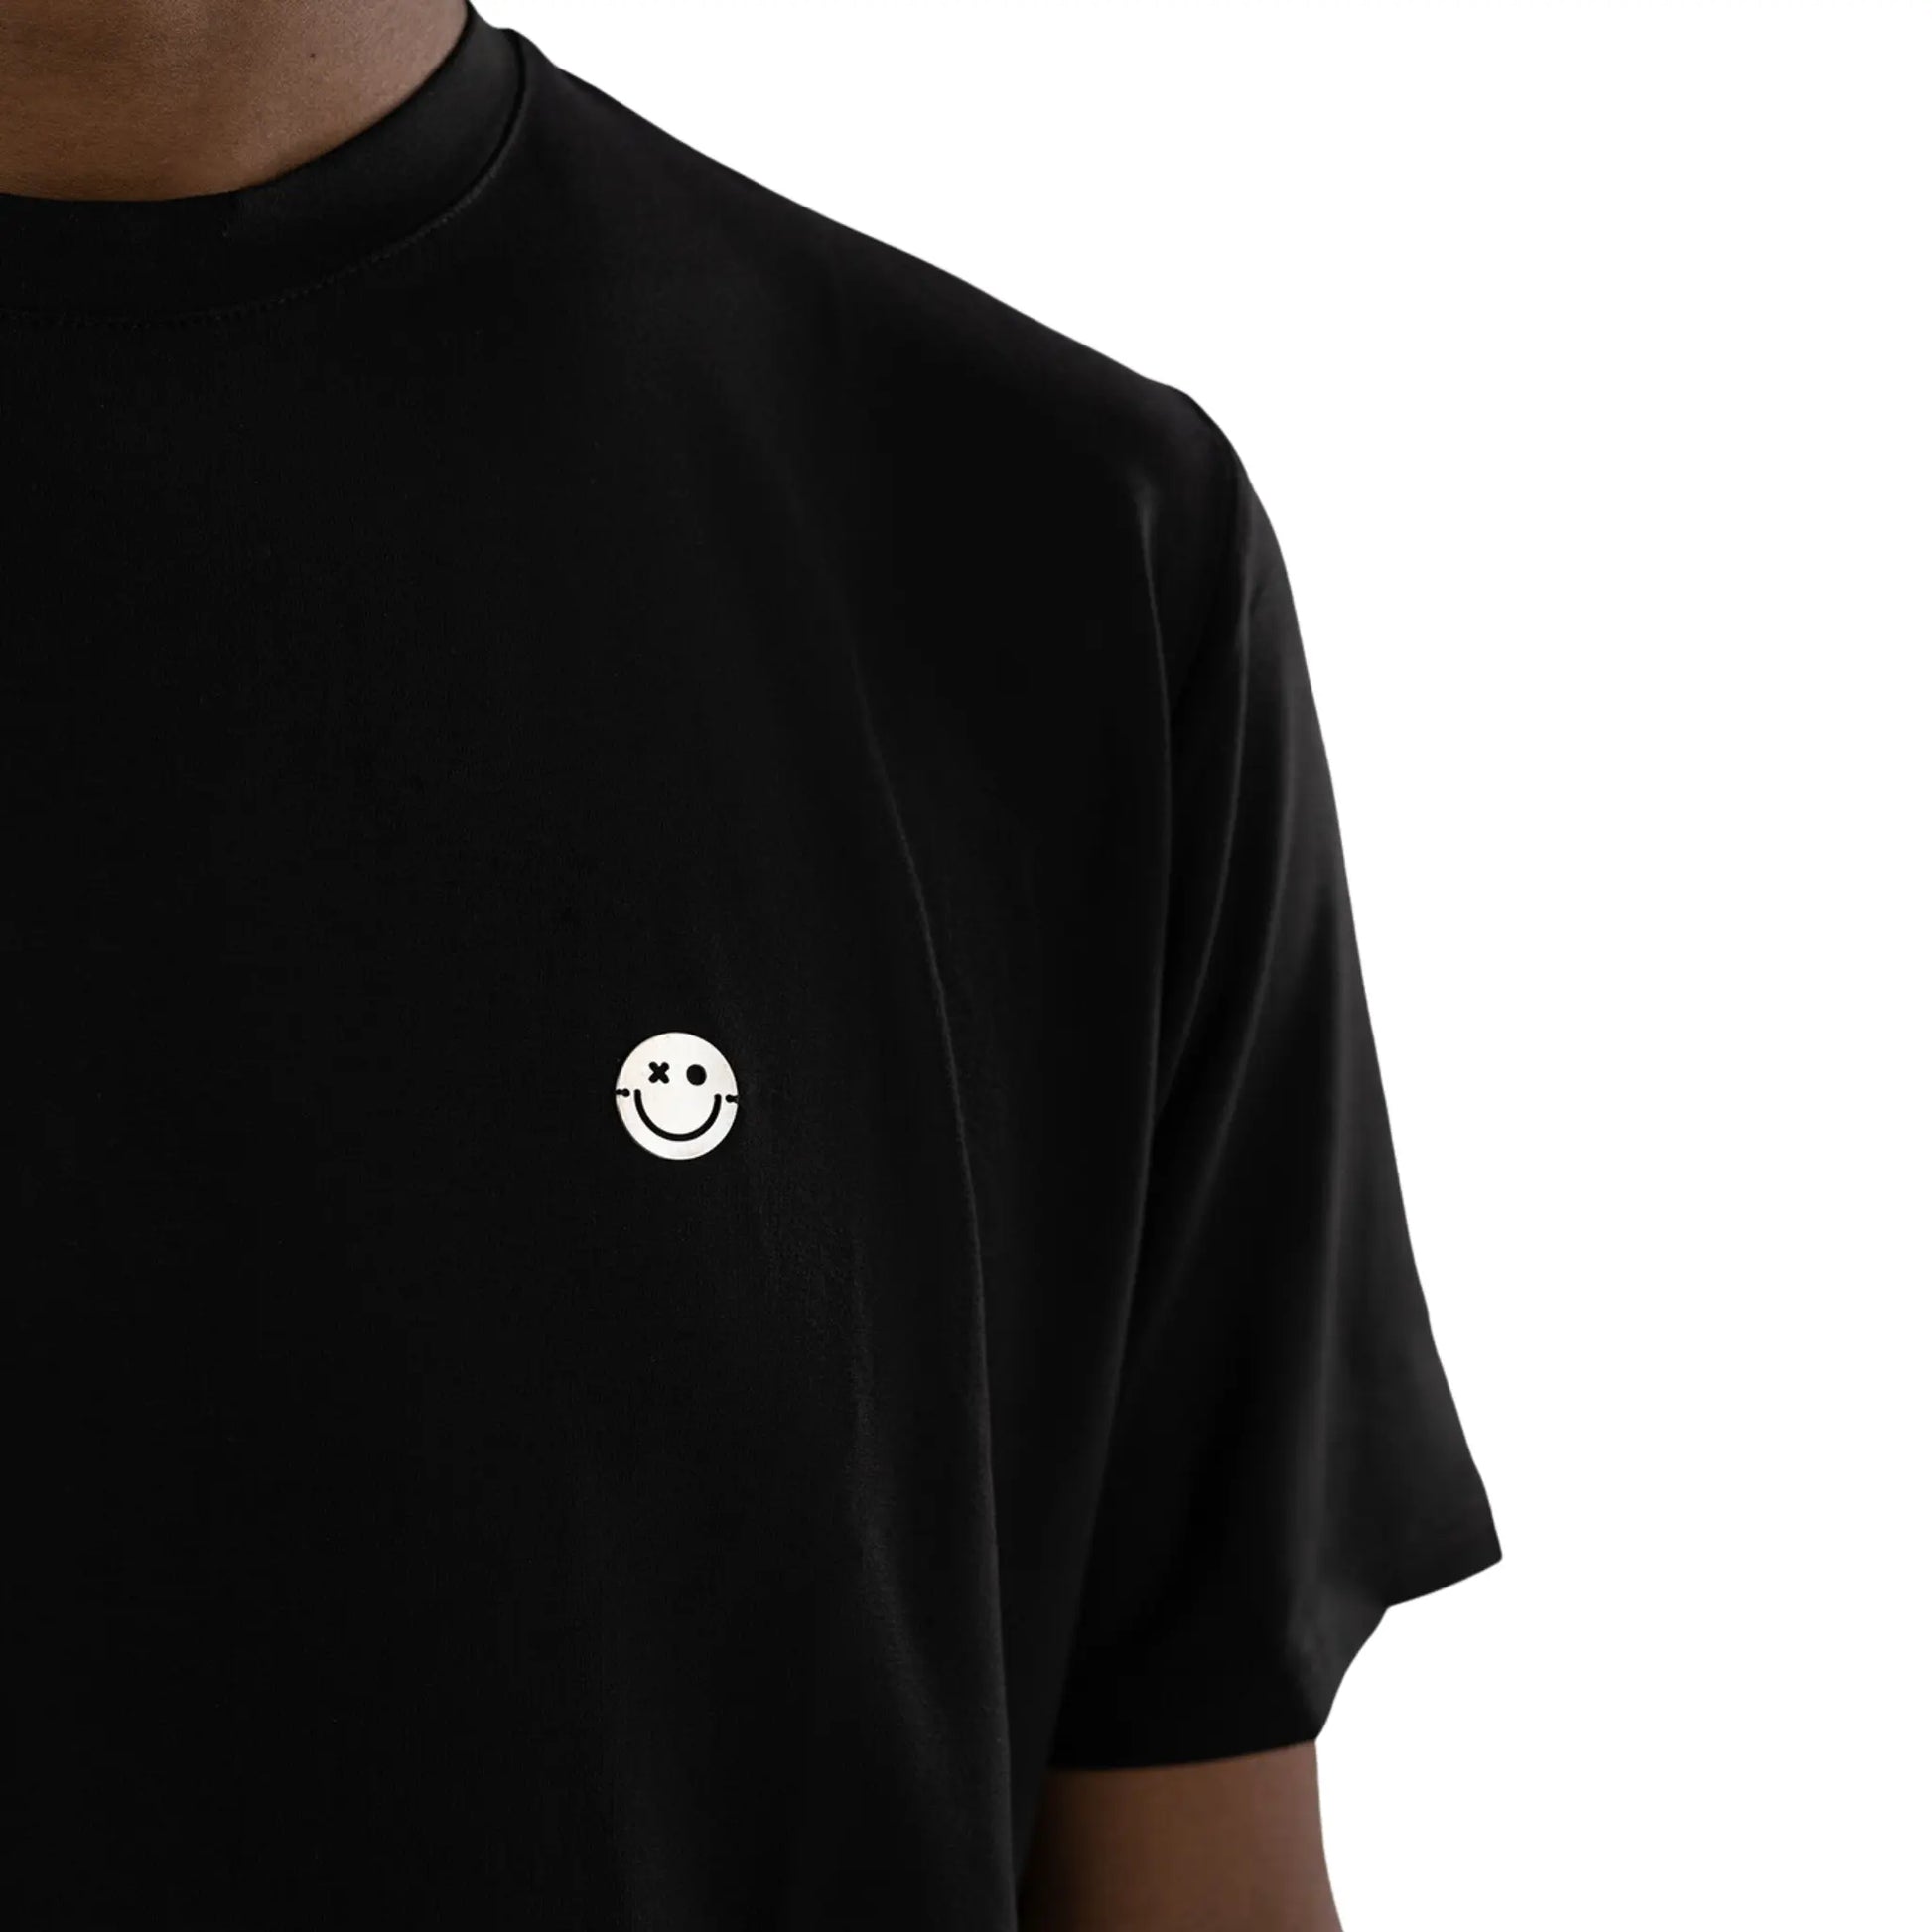 L’Homme Moderne Smiley Regular Fit T-shirt worn by black man close up view on the smiley logo